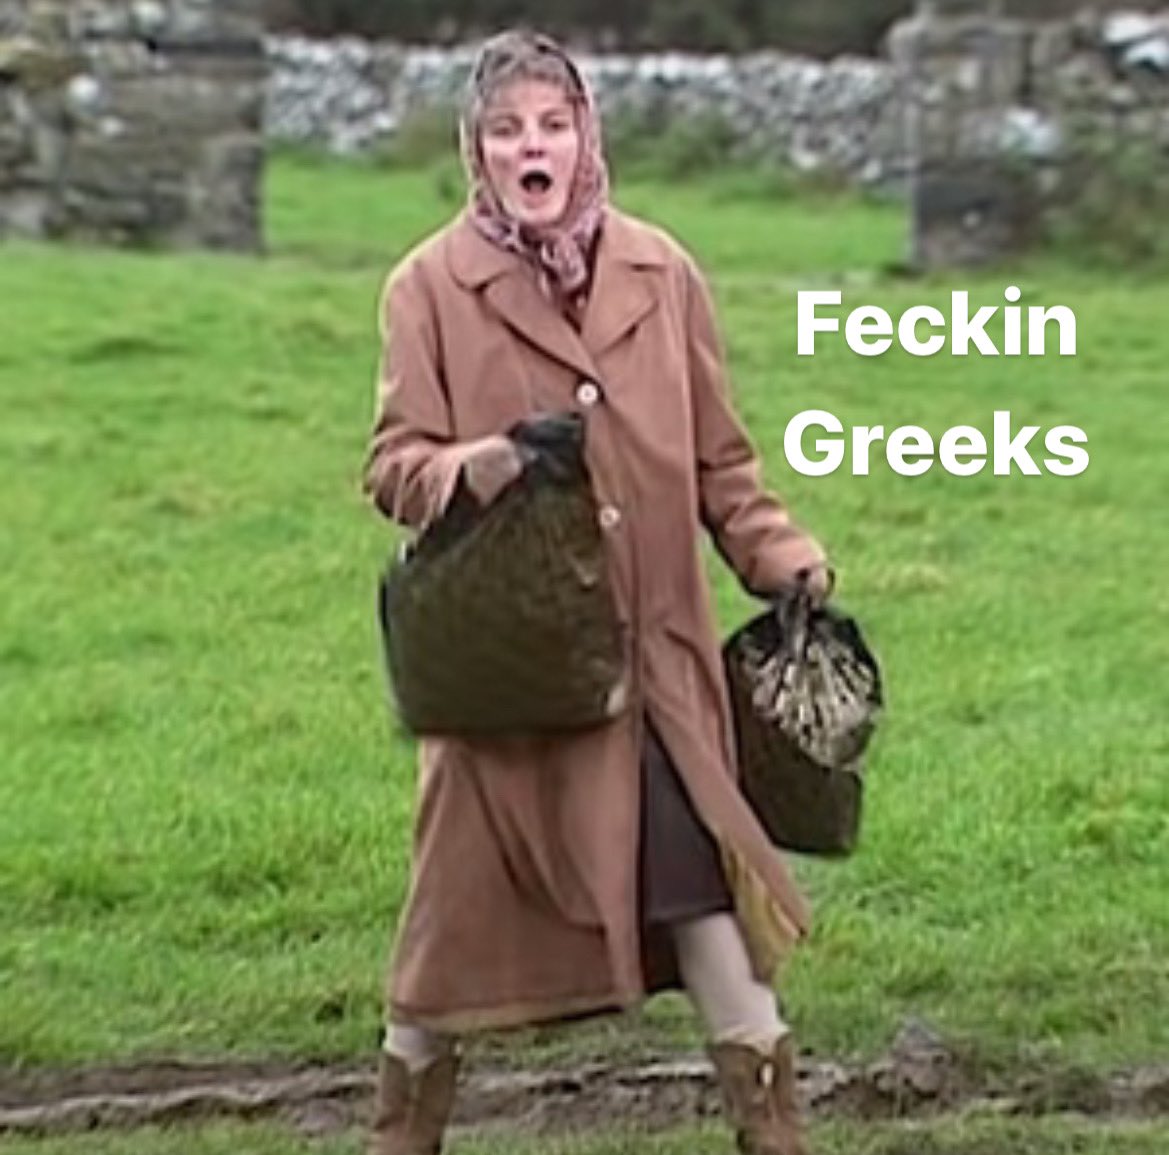 Ireland are absolutely brutal at football #GREIRE #GREIRL #fatherted #feckingreeks